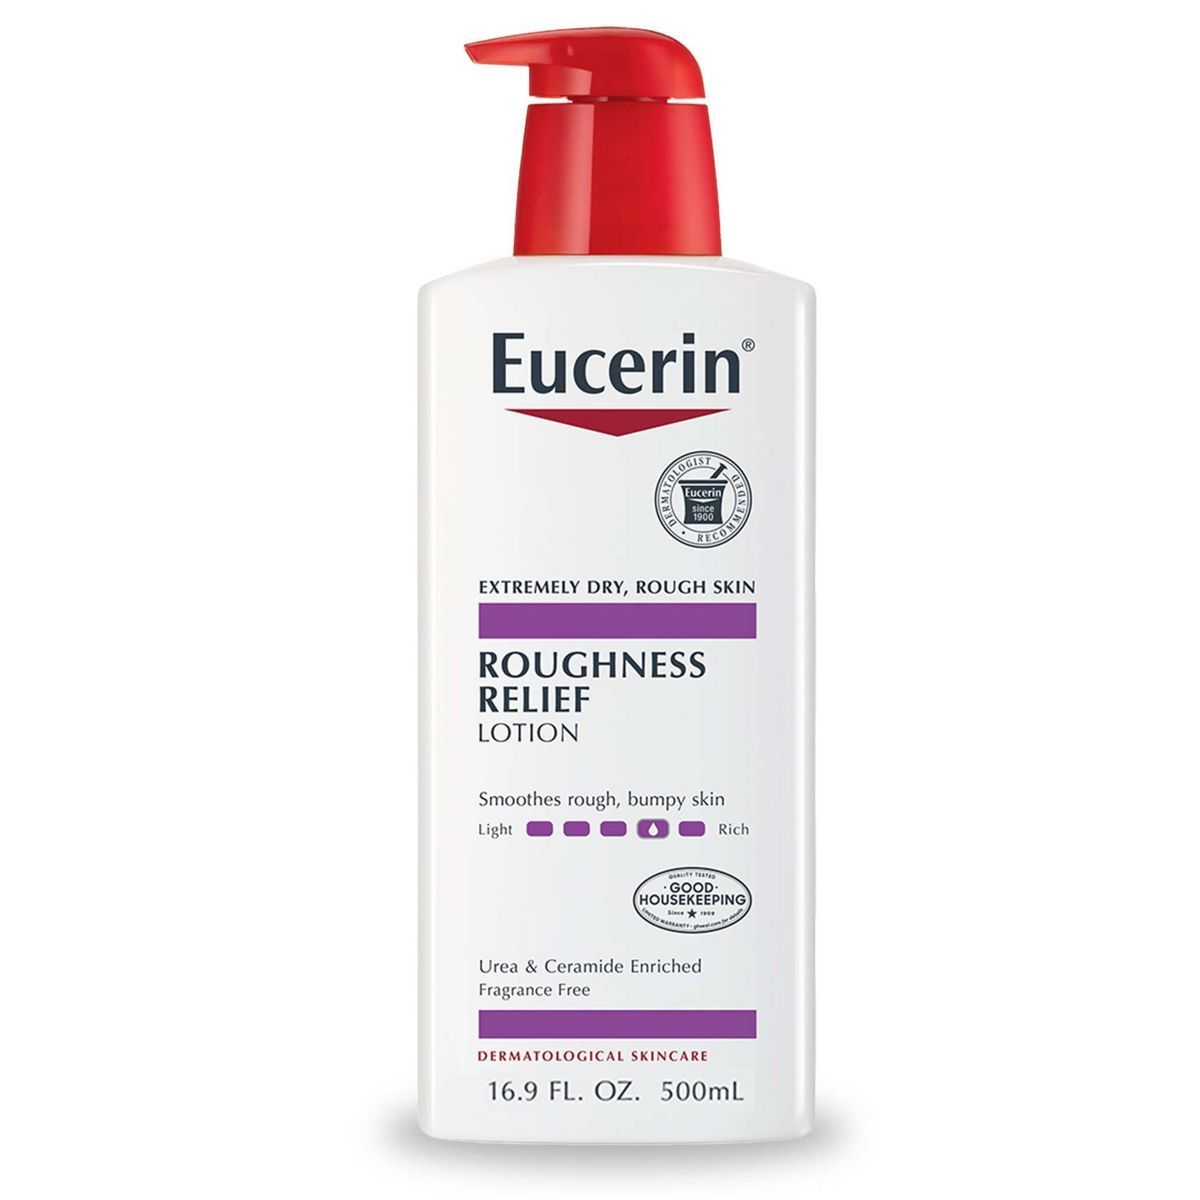 Eucerin Roughness Relief Lotion Unscented Body Lotion for Dry Skin - 16.9 fl oz | Target